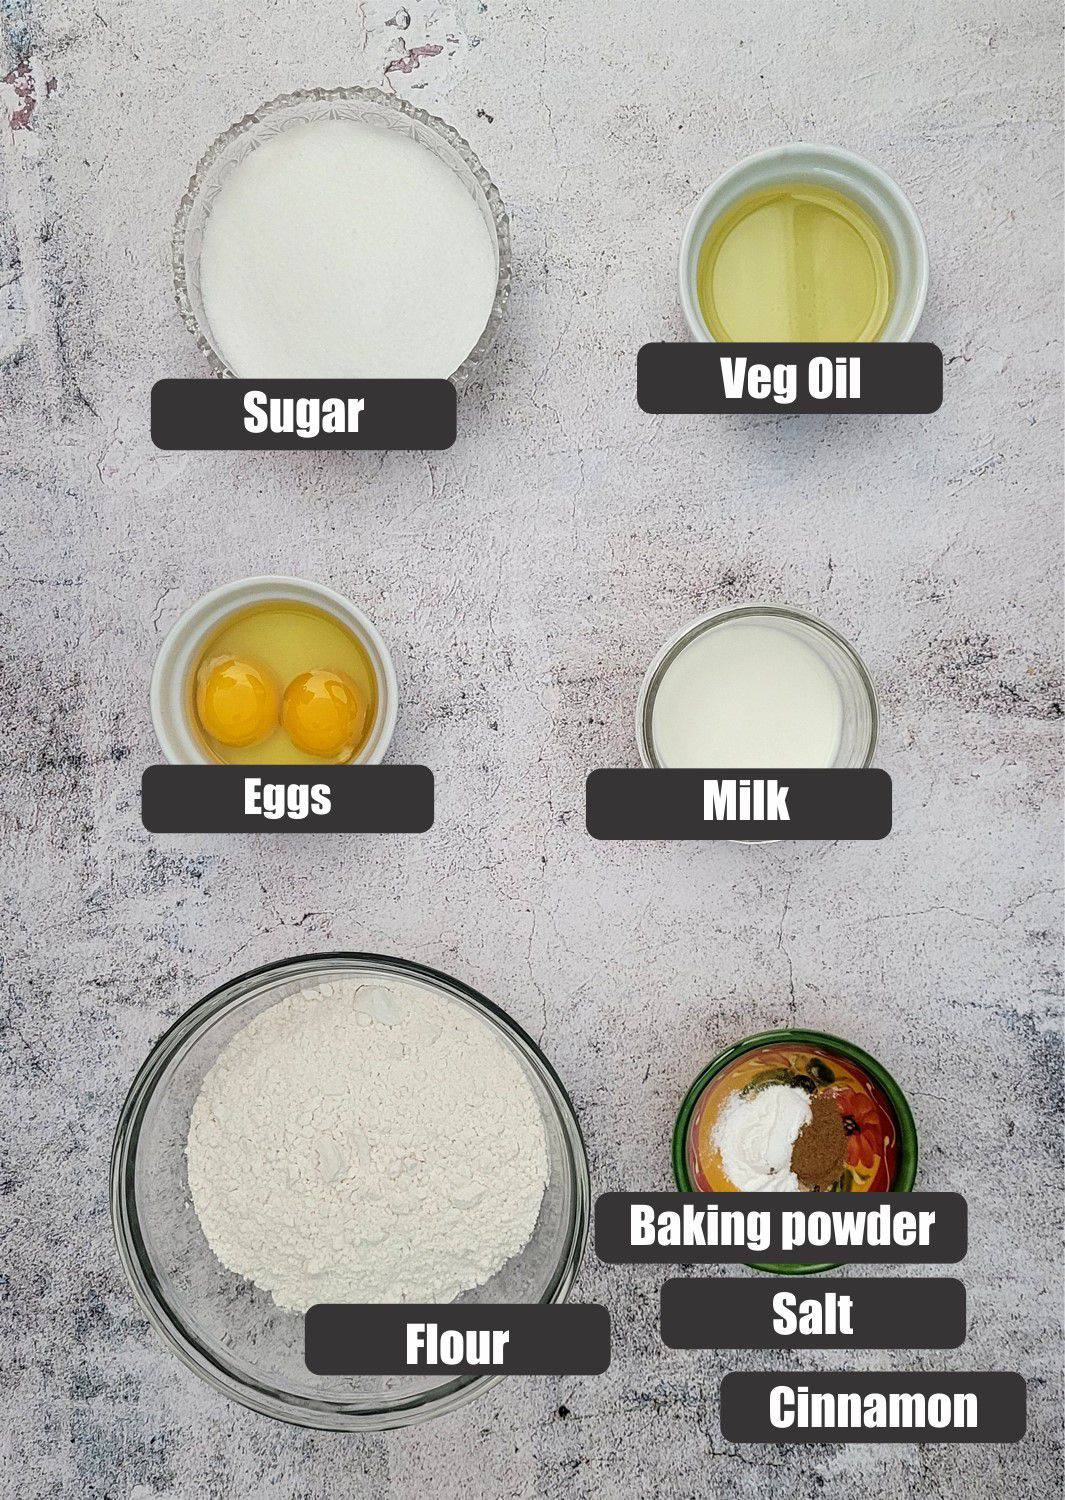 ingredients needed for the cake portion of the dessert